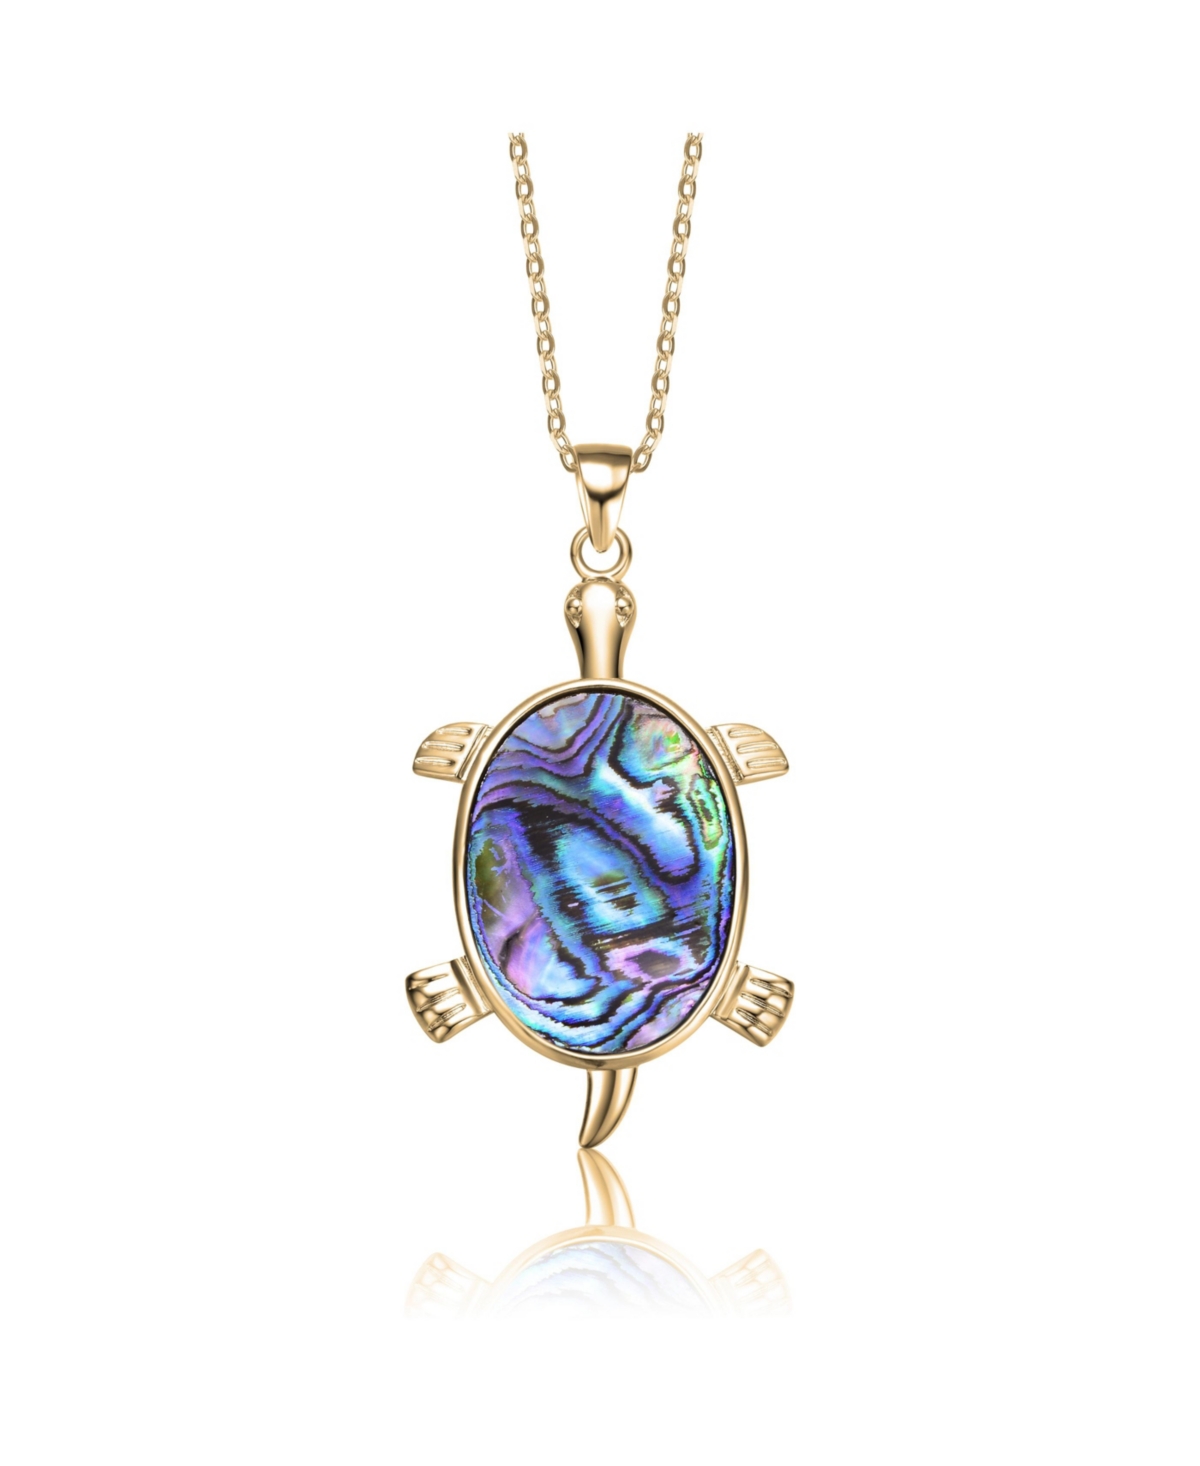 Genevive Classic 14k Gold Plated Abalone Charm Pendant Necklace